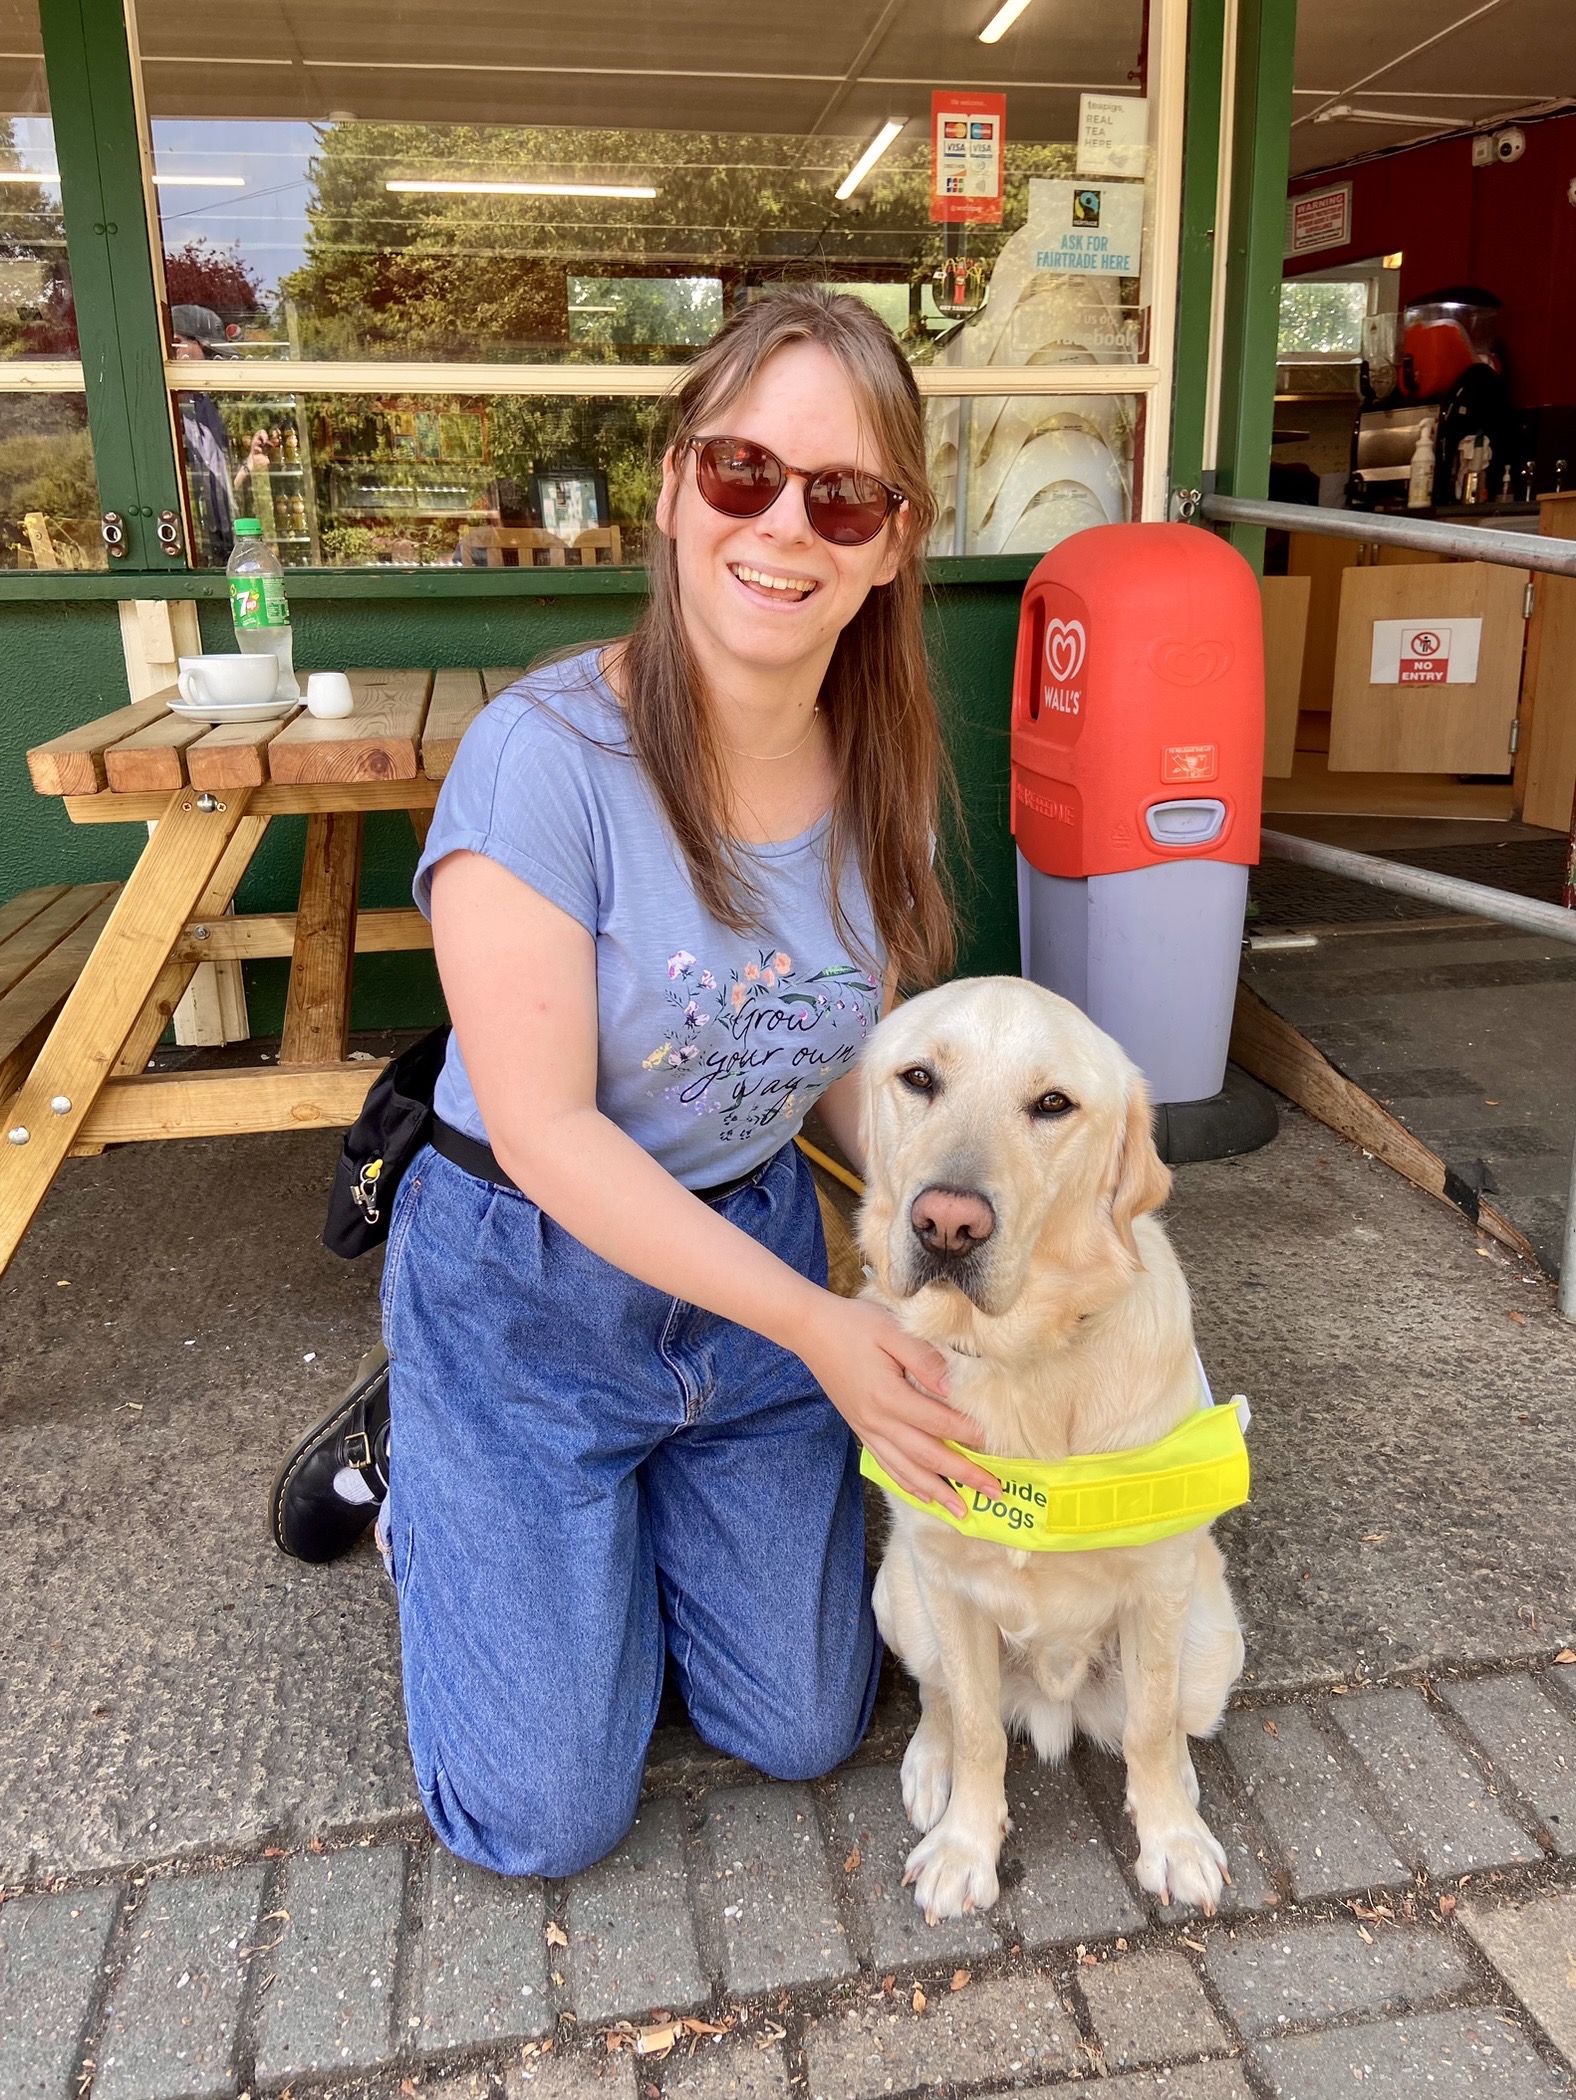 Disability blogger Chloe tear with her guide dog Lezzie